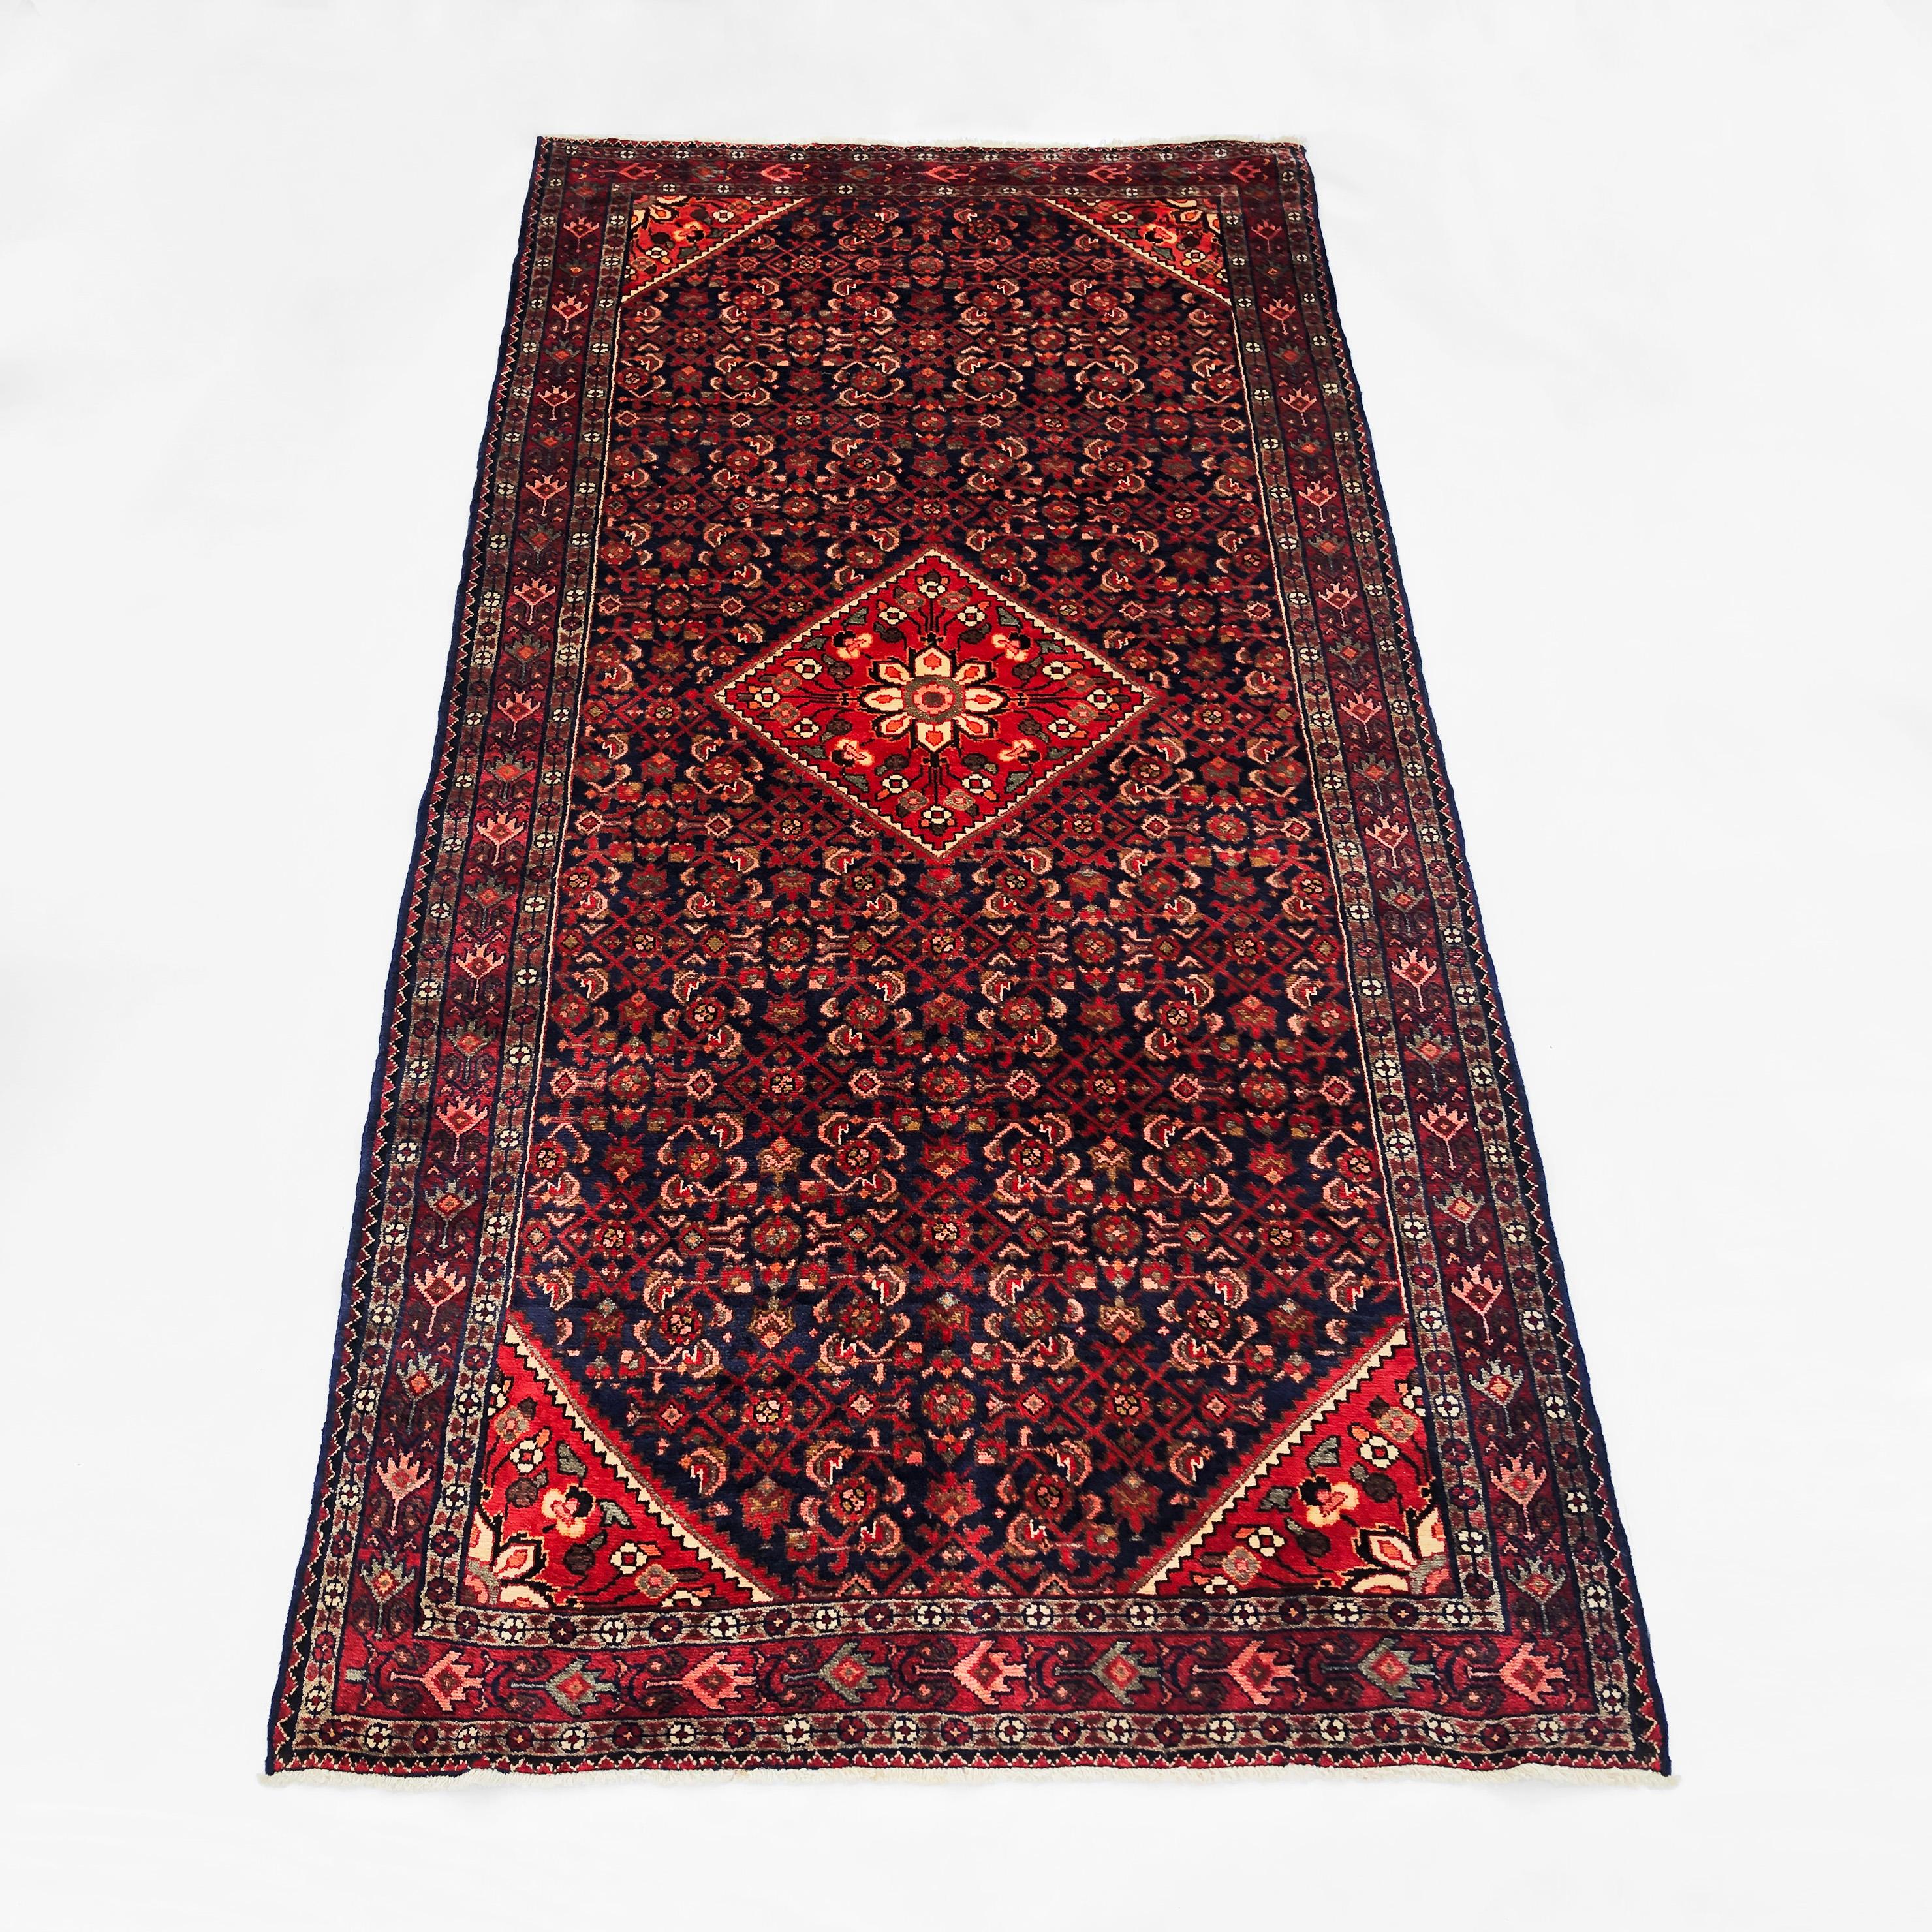 This handmade wool rug from Hosseinabad, Iran, features an intricate Herati design in deep shades of red and blue. The Herati design is a traditional Persian pattern, believed to be based on older Farahan designs typical of the region. The wool has